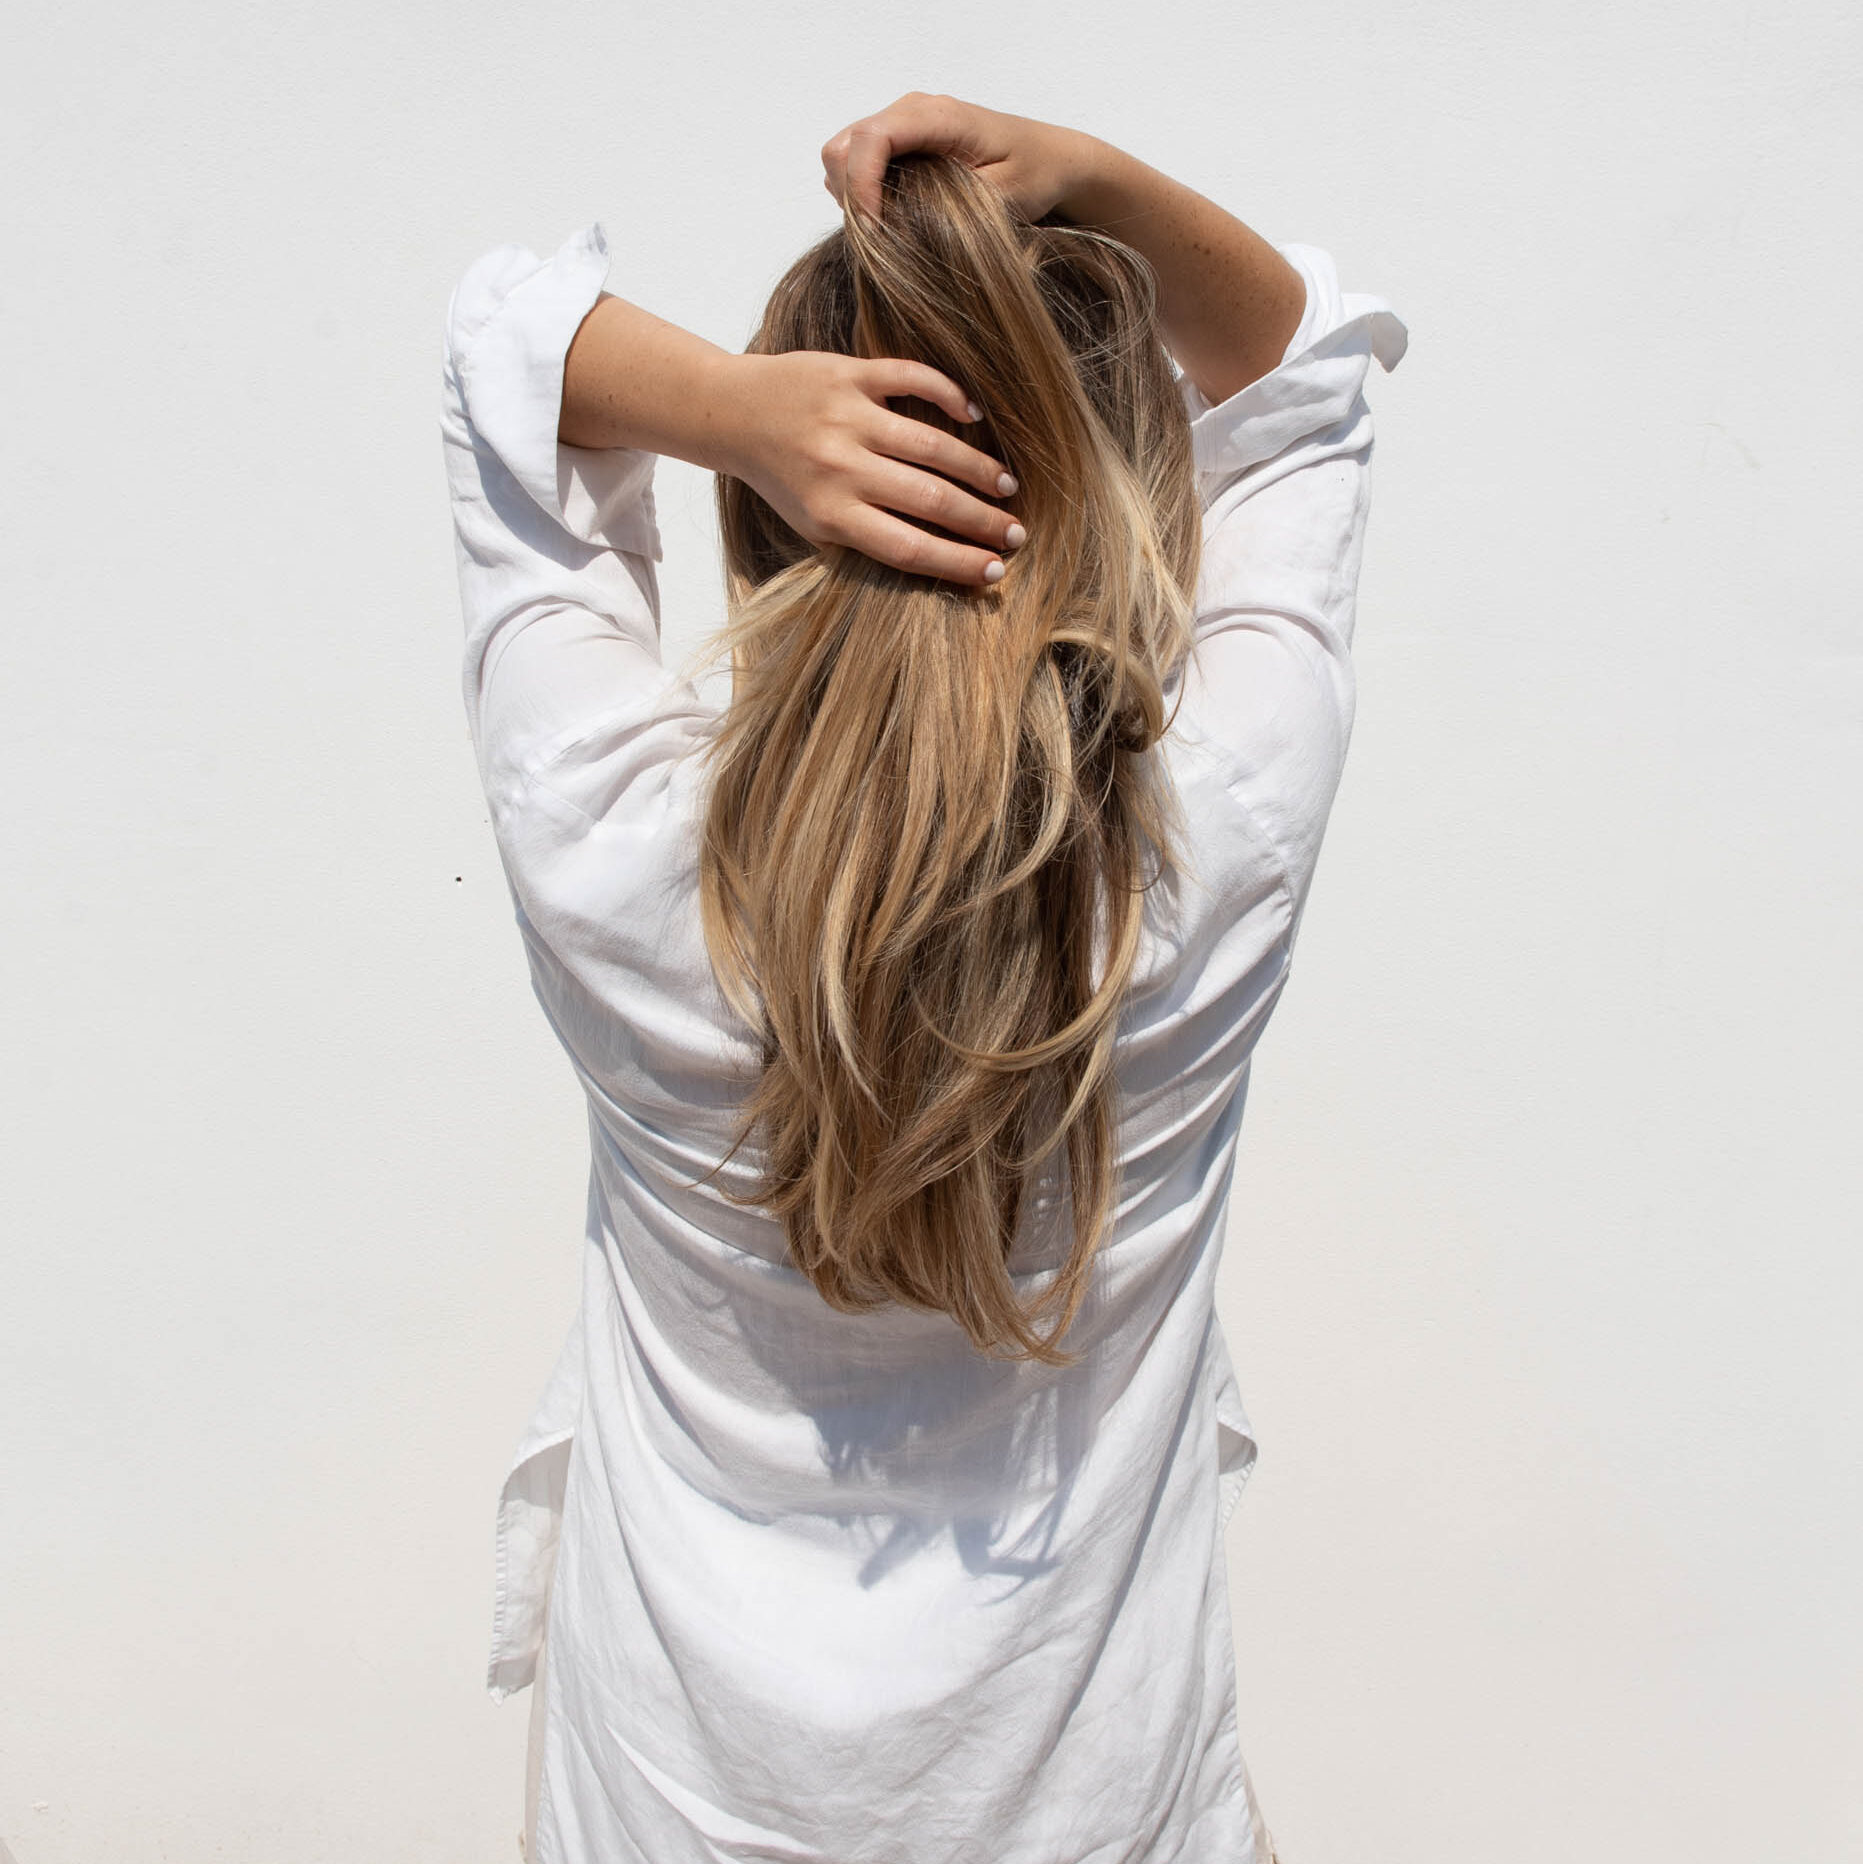 Woman running her hands through her long blonde hair. Elevate your brand with feminine Self-care stock and videos collection.